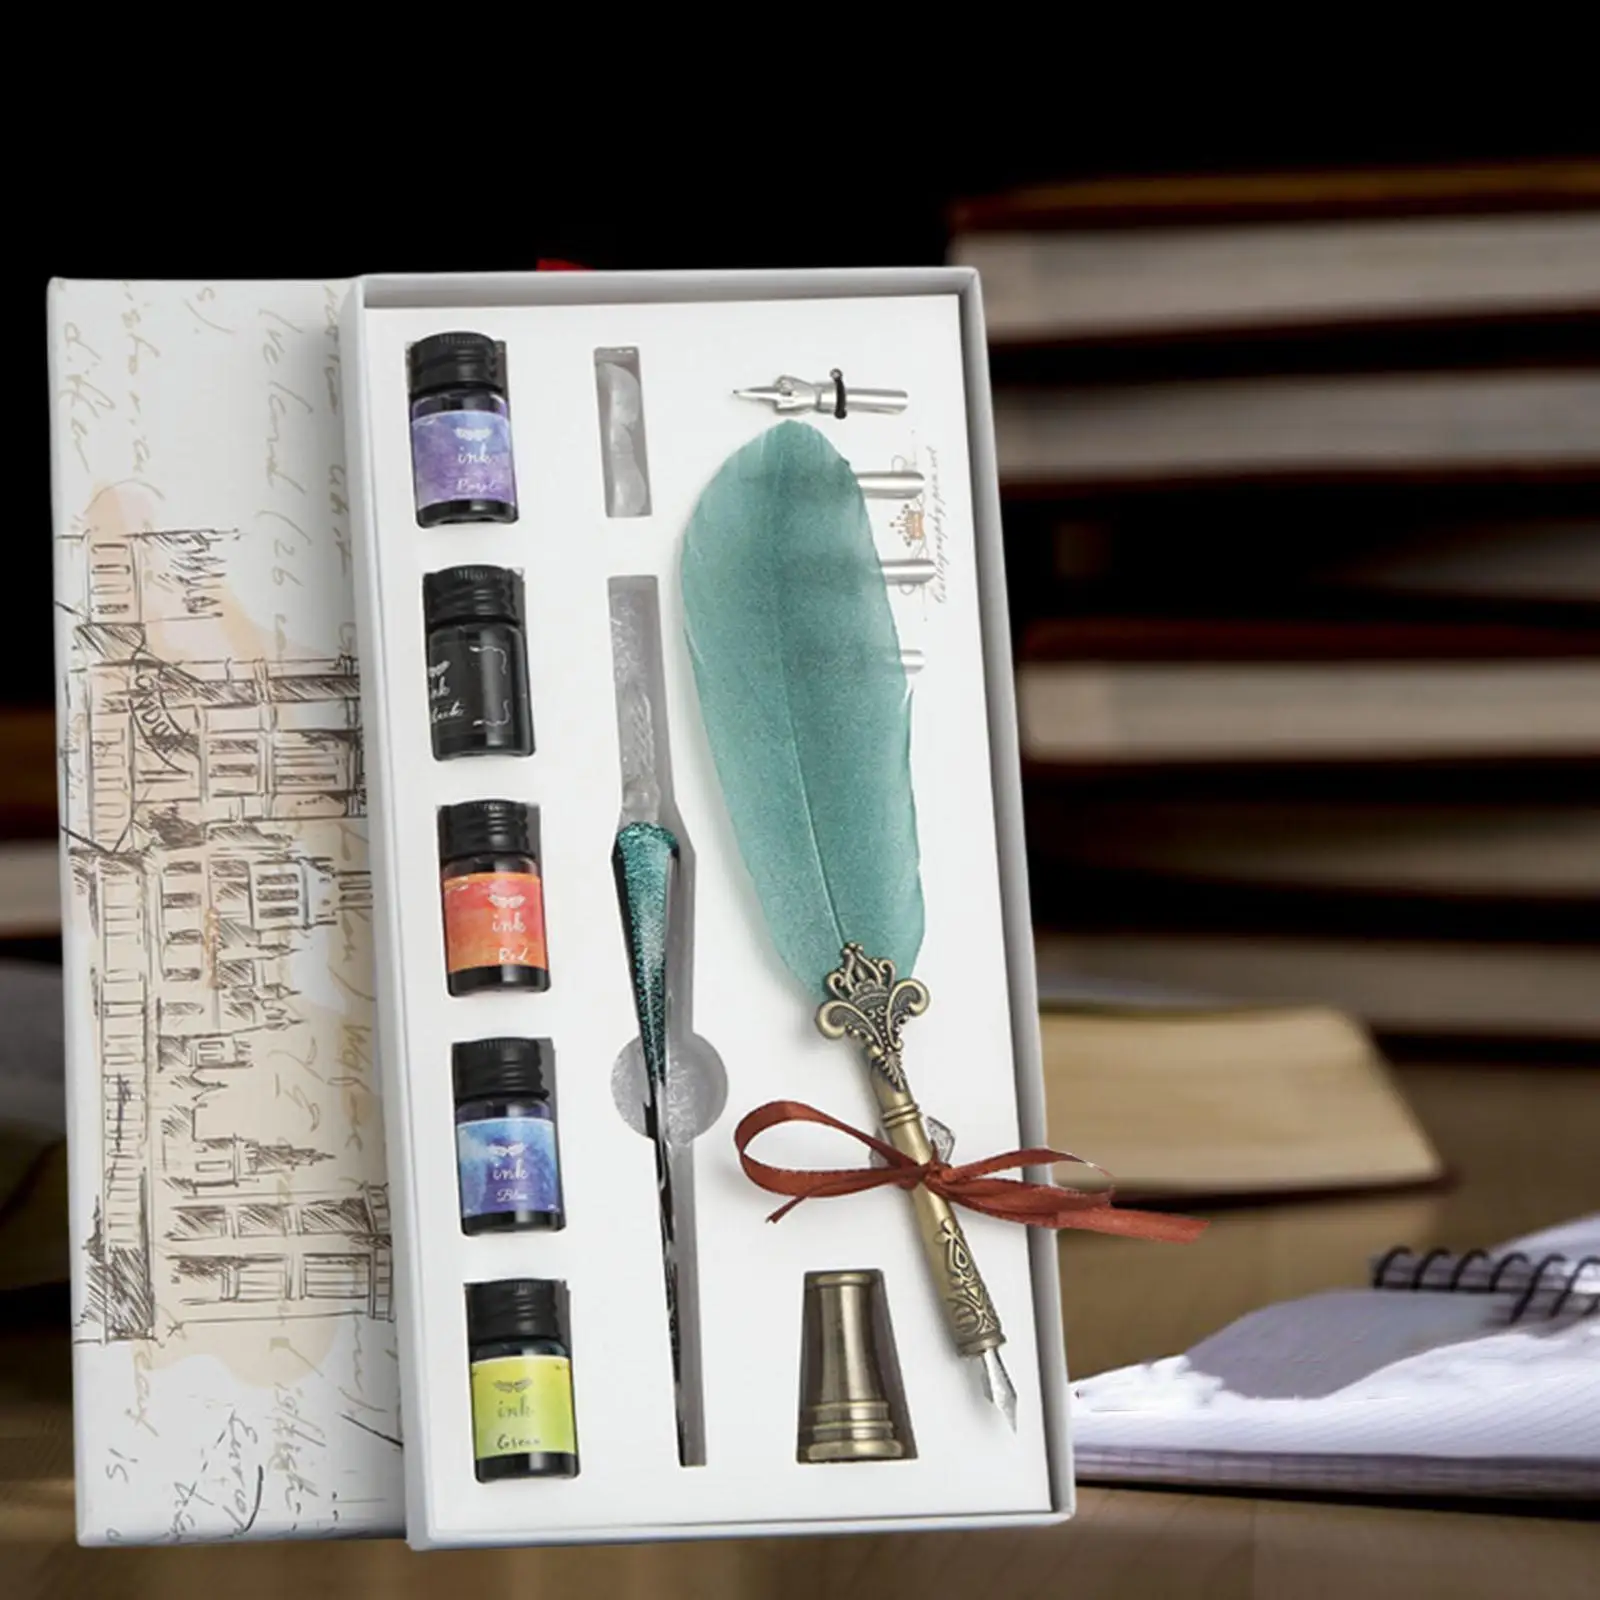  School Vintage Feather Quill Dip Calligraphy Fountain Pen Writing Ink Set Stationery Gift Box